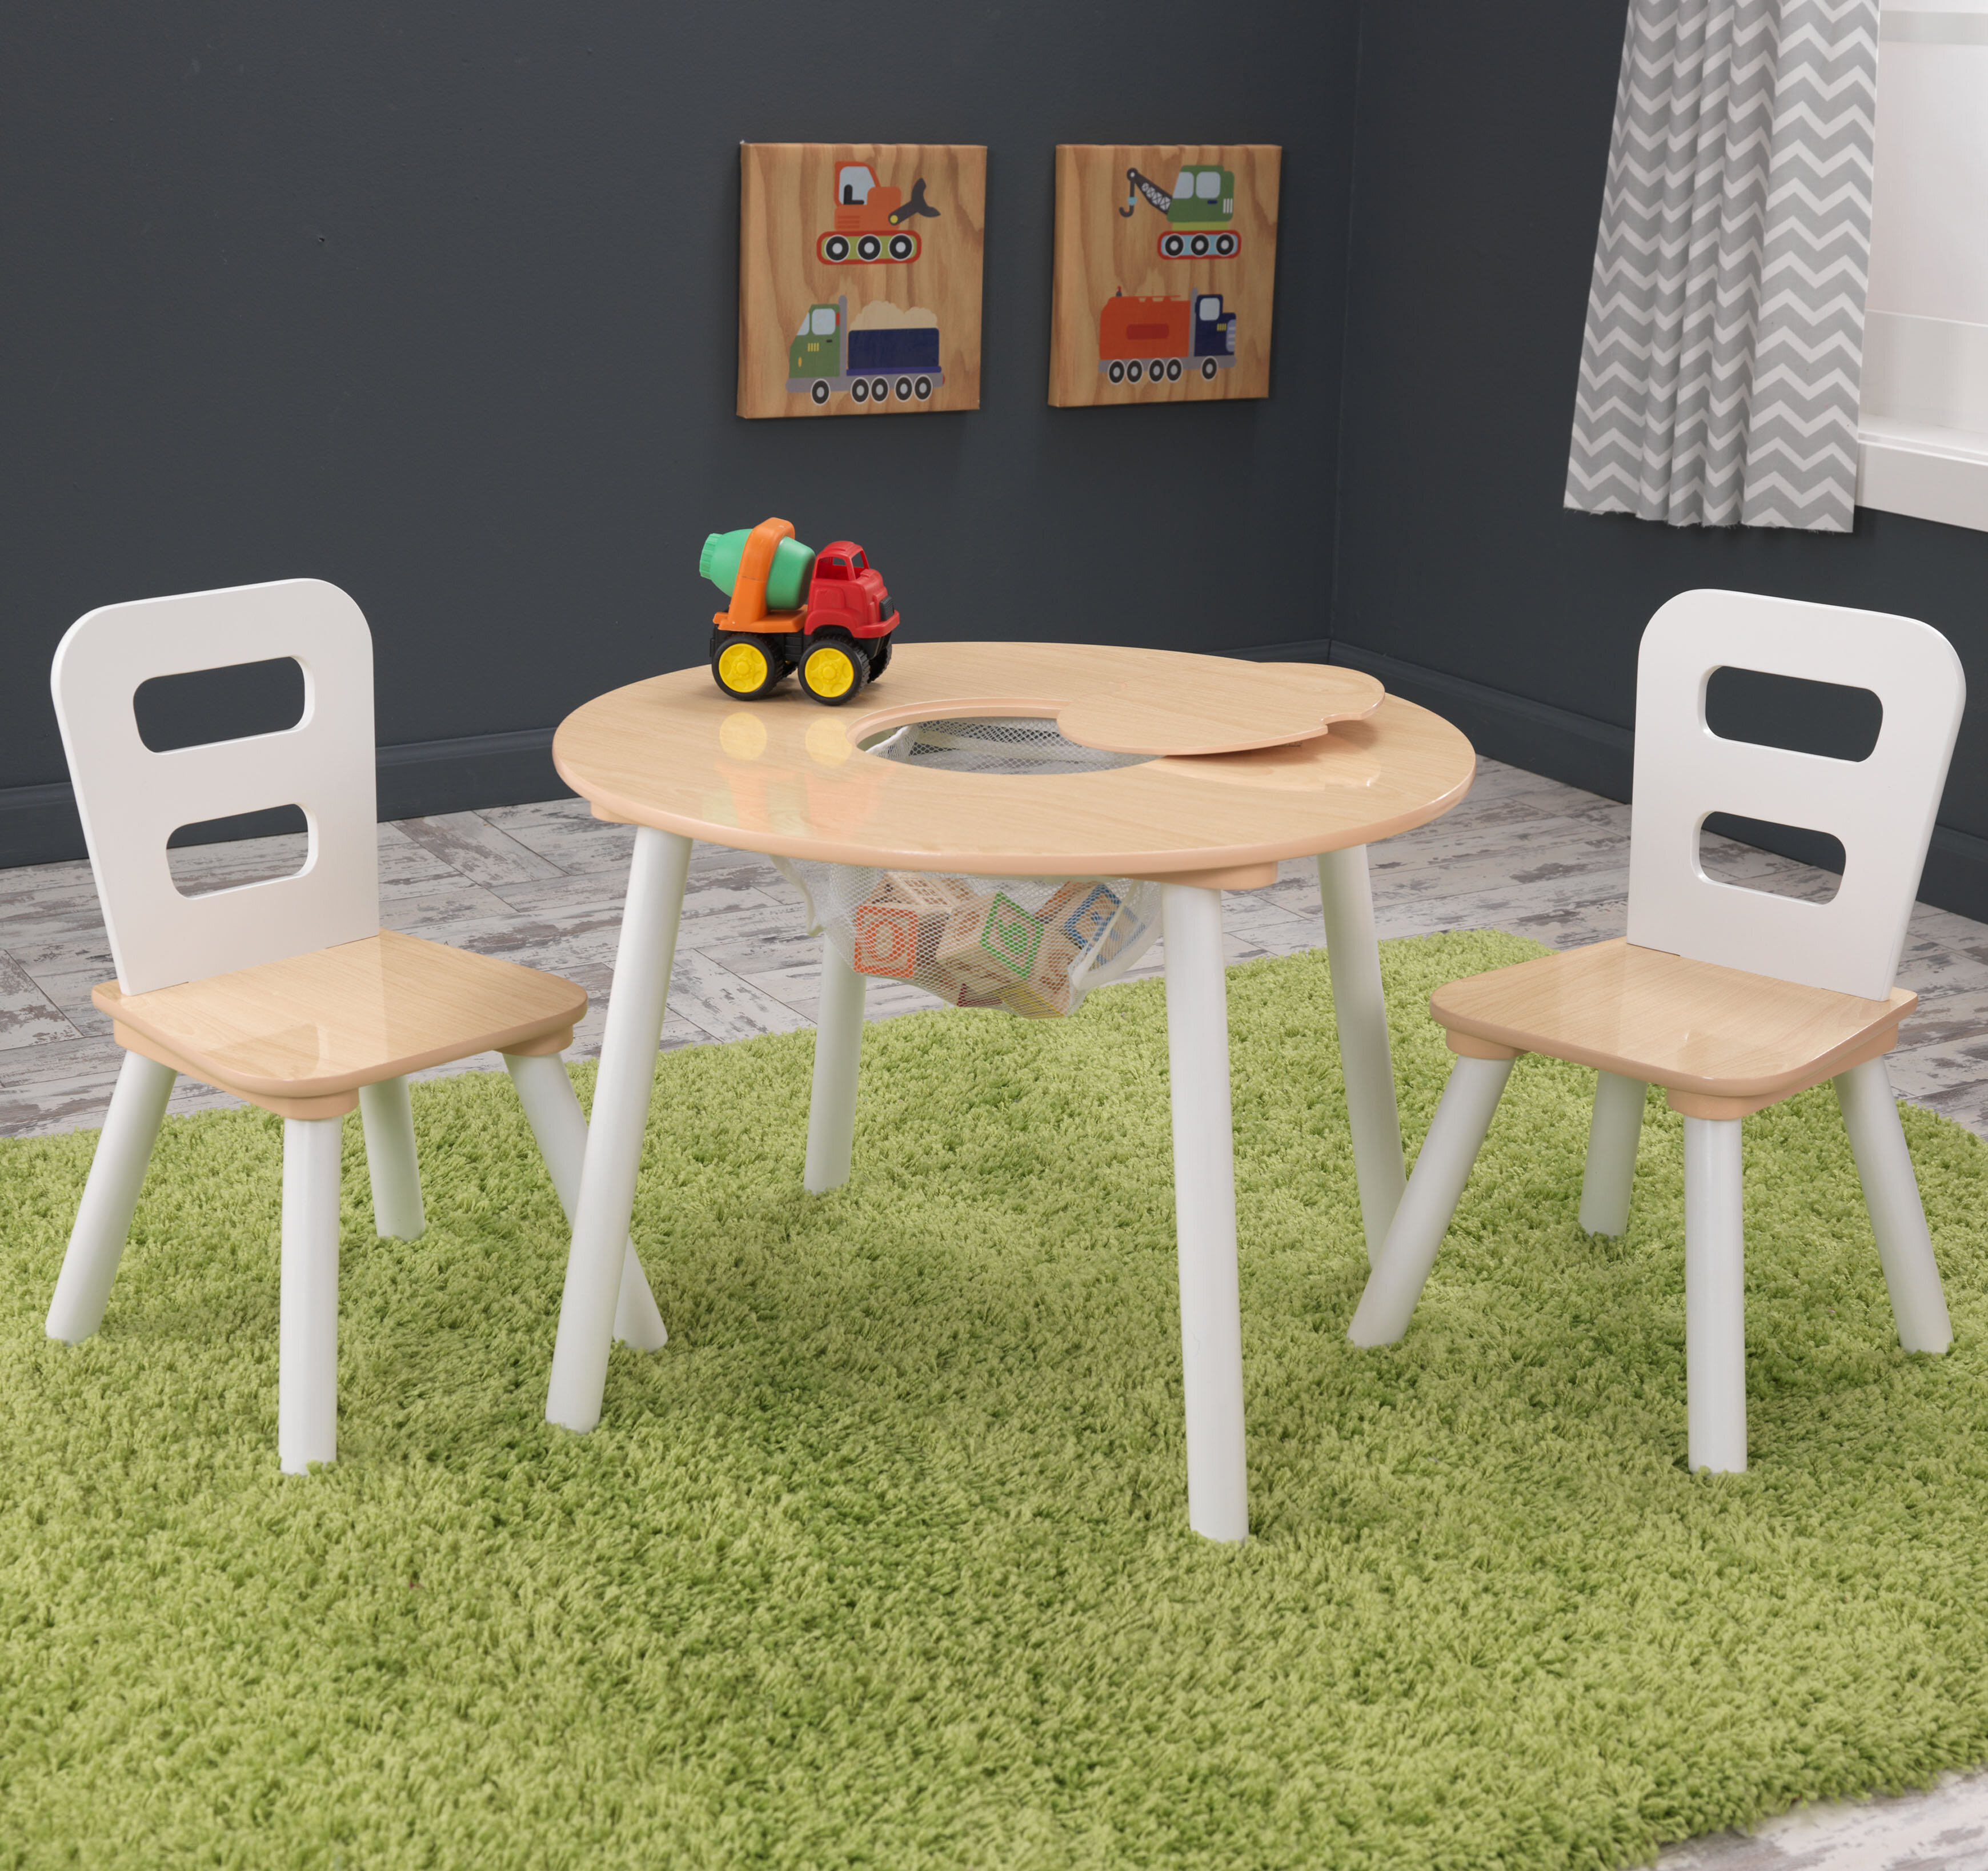 8 to 12 Year Old Toddler & Kids Table & Chair Sets You'll  - Wayfair